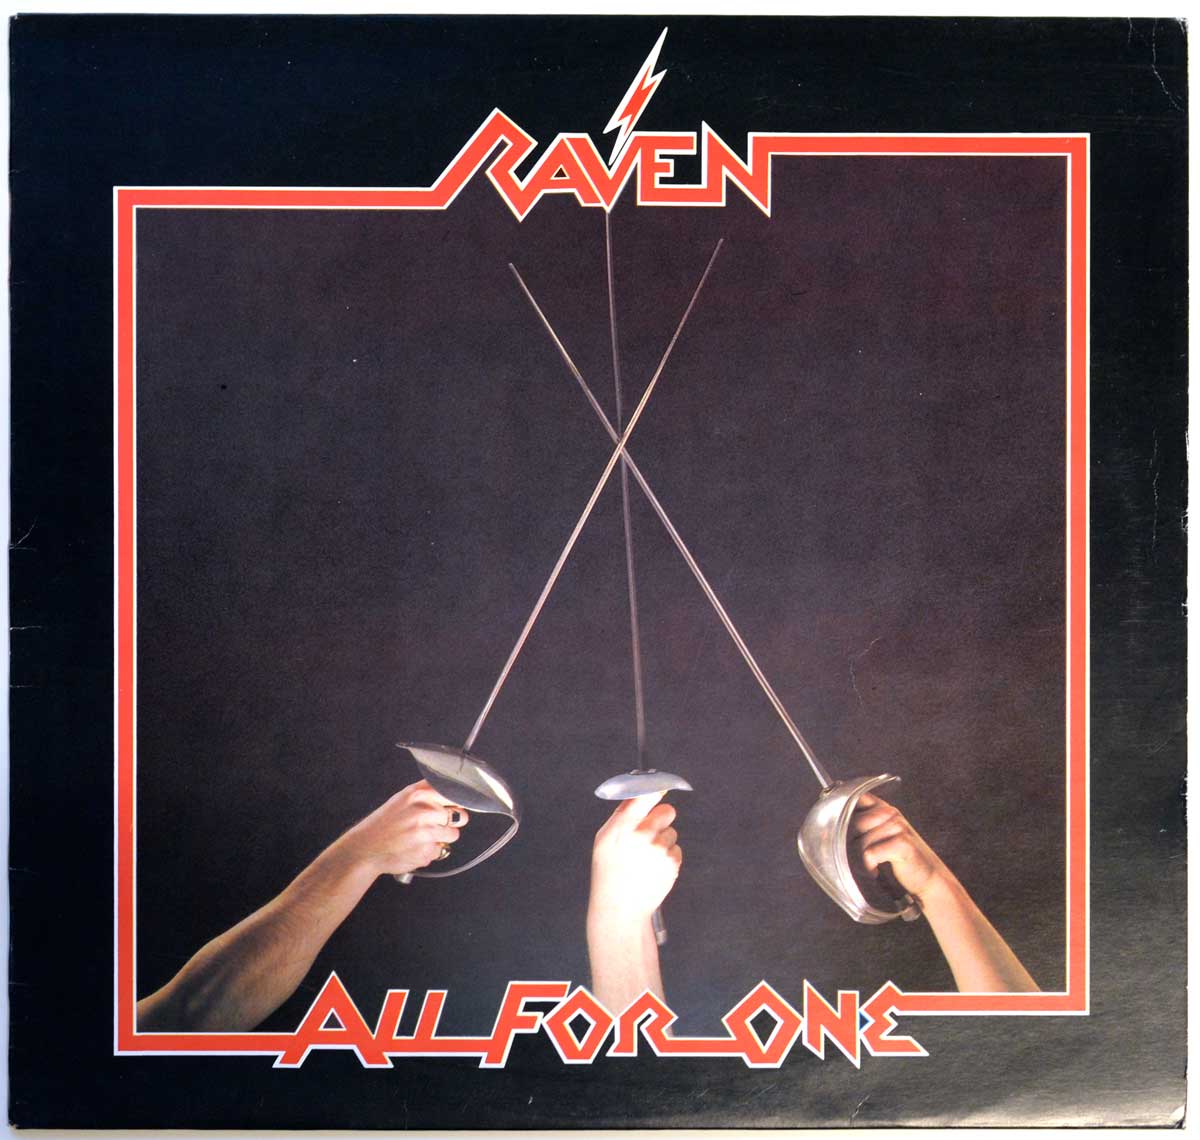 RAVEN - All For One large photo of the front cover